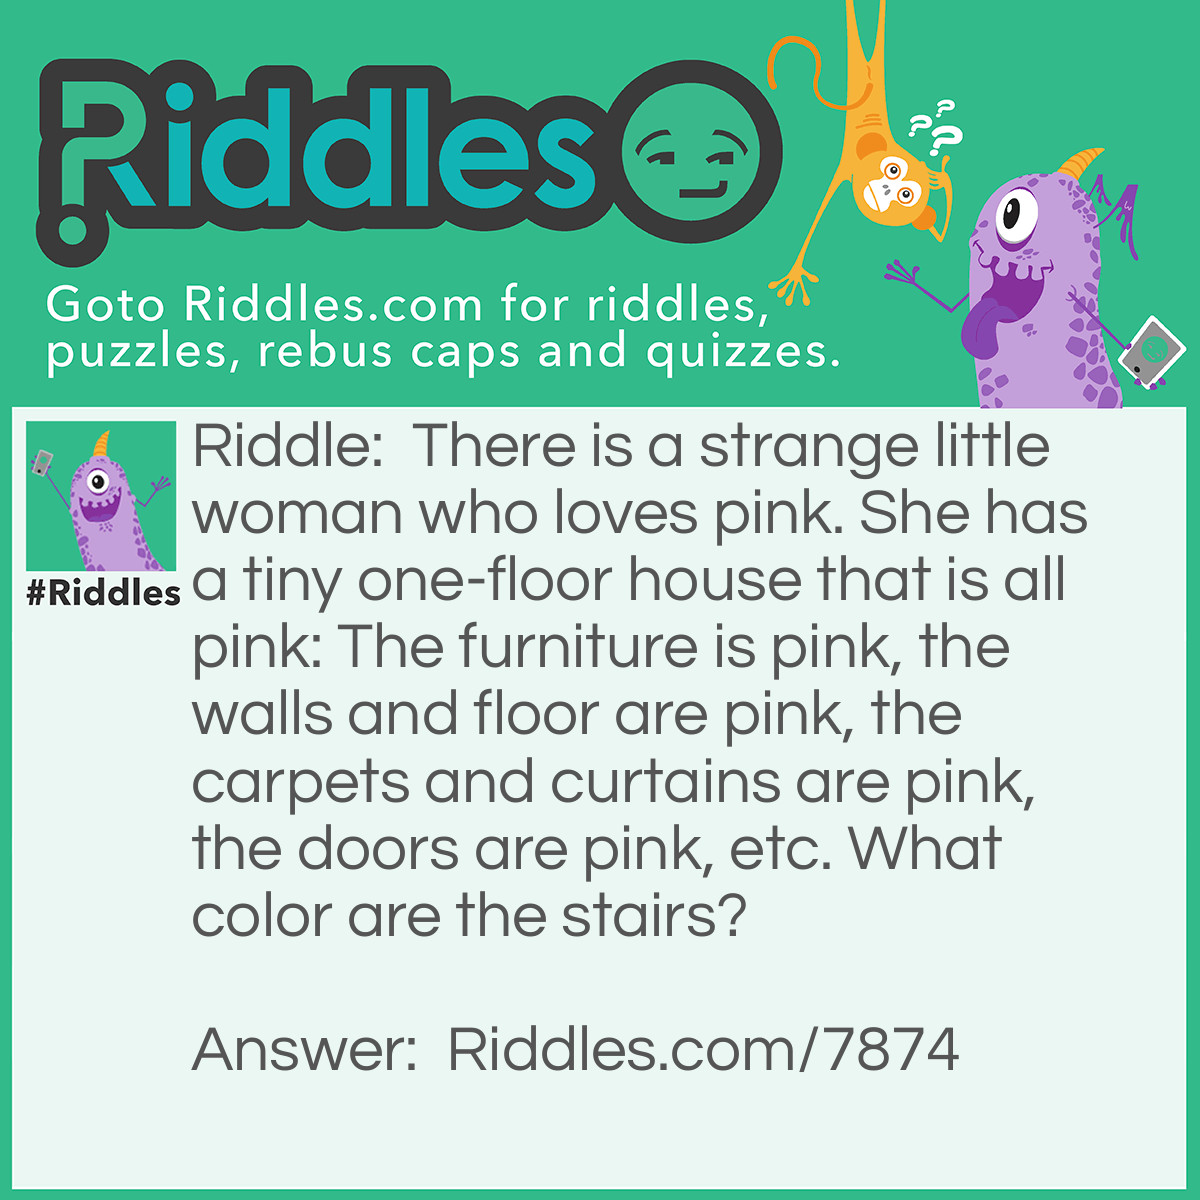 Riddle: There is a strange little woman who loves pink. She has a tiny one-floor house that is all pink: The furniture is pink, the walls and floor are pink, the carpets and curtains are pink, the doors are pink, etc. What color are the stairs? Answer: There are no stairs. She lives in a one-floor house.